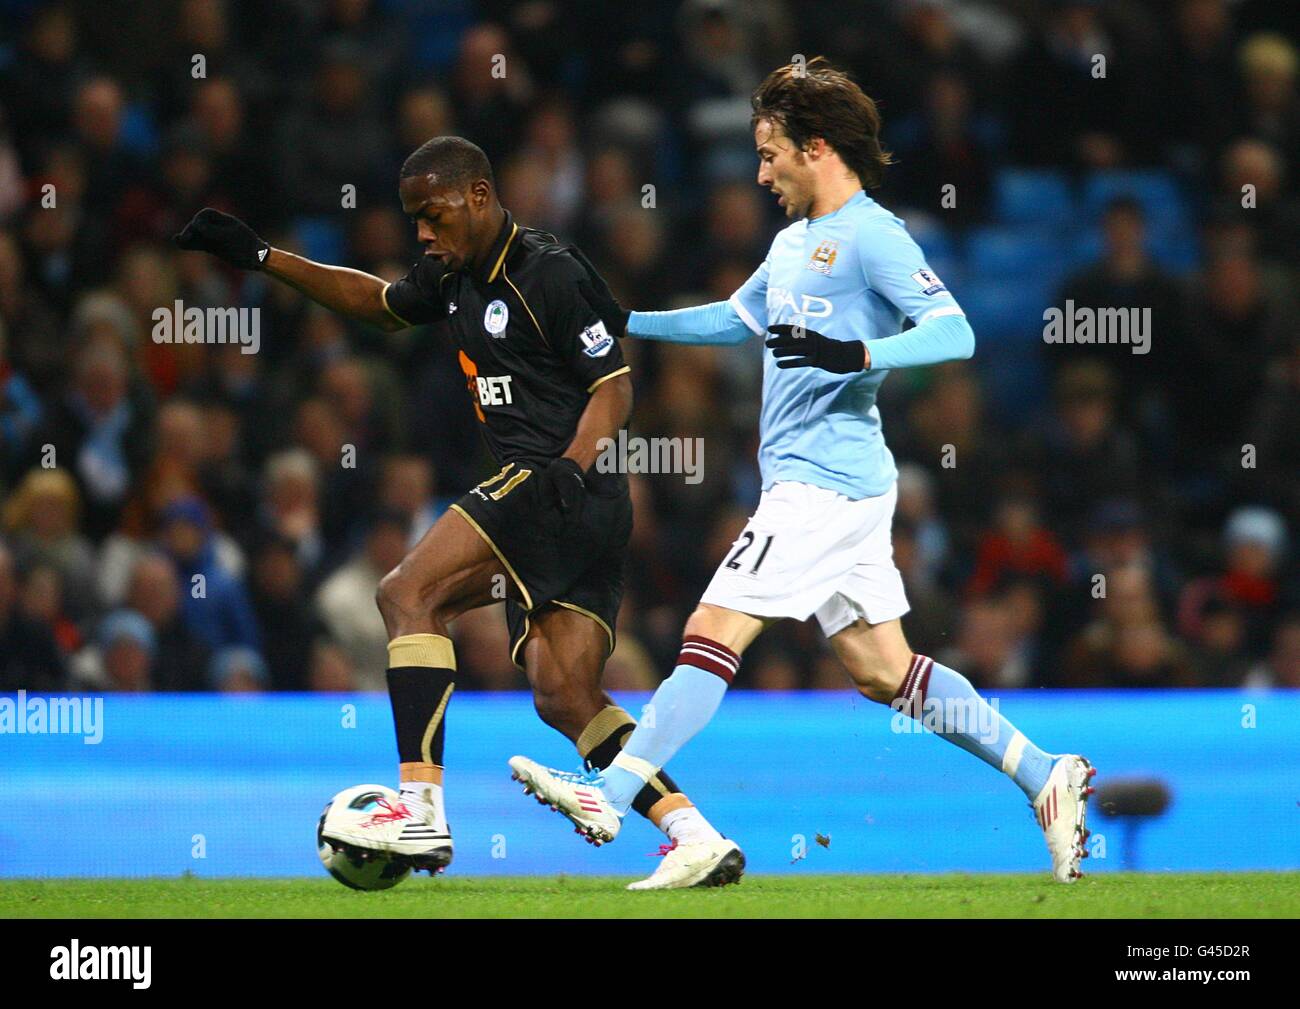 Soccer - Barclays Premier League - Manchester City v Wigan Athletic - City of Manchester Stadium. Wigan Athletic's Maynor Figueroa (left) and Manchester City's David Silva (right) Stock Photo